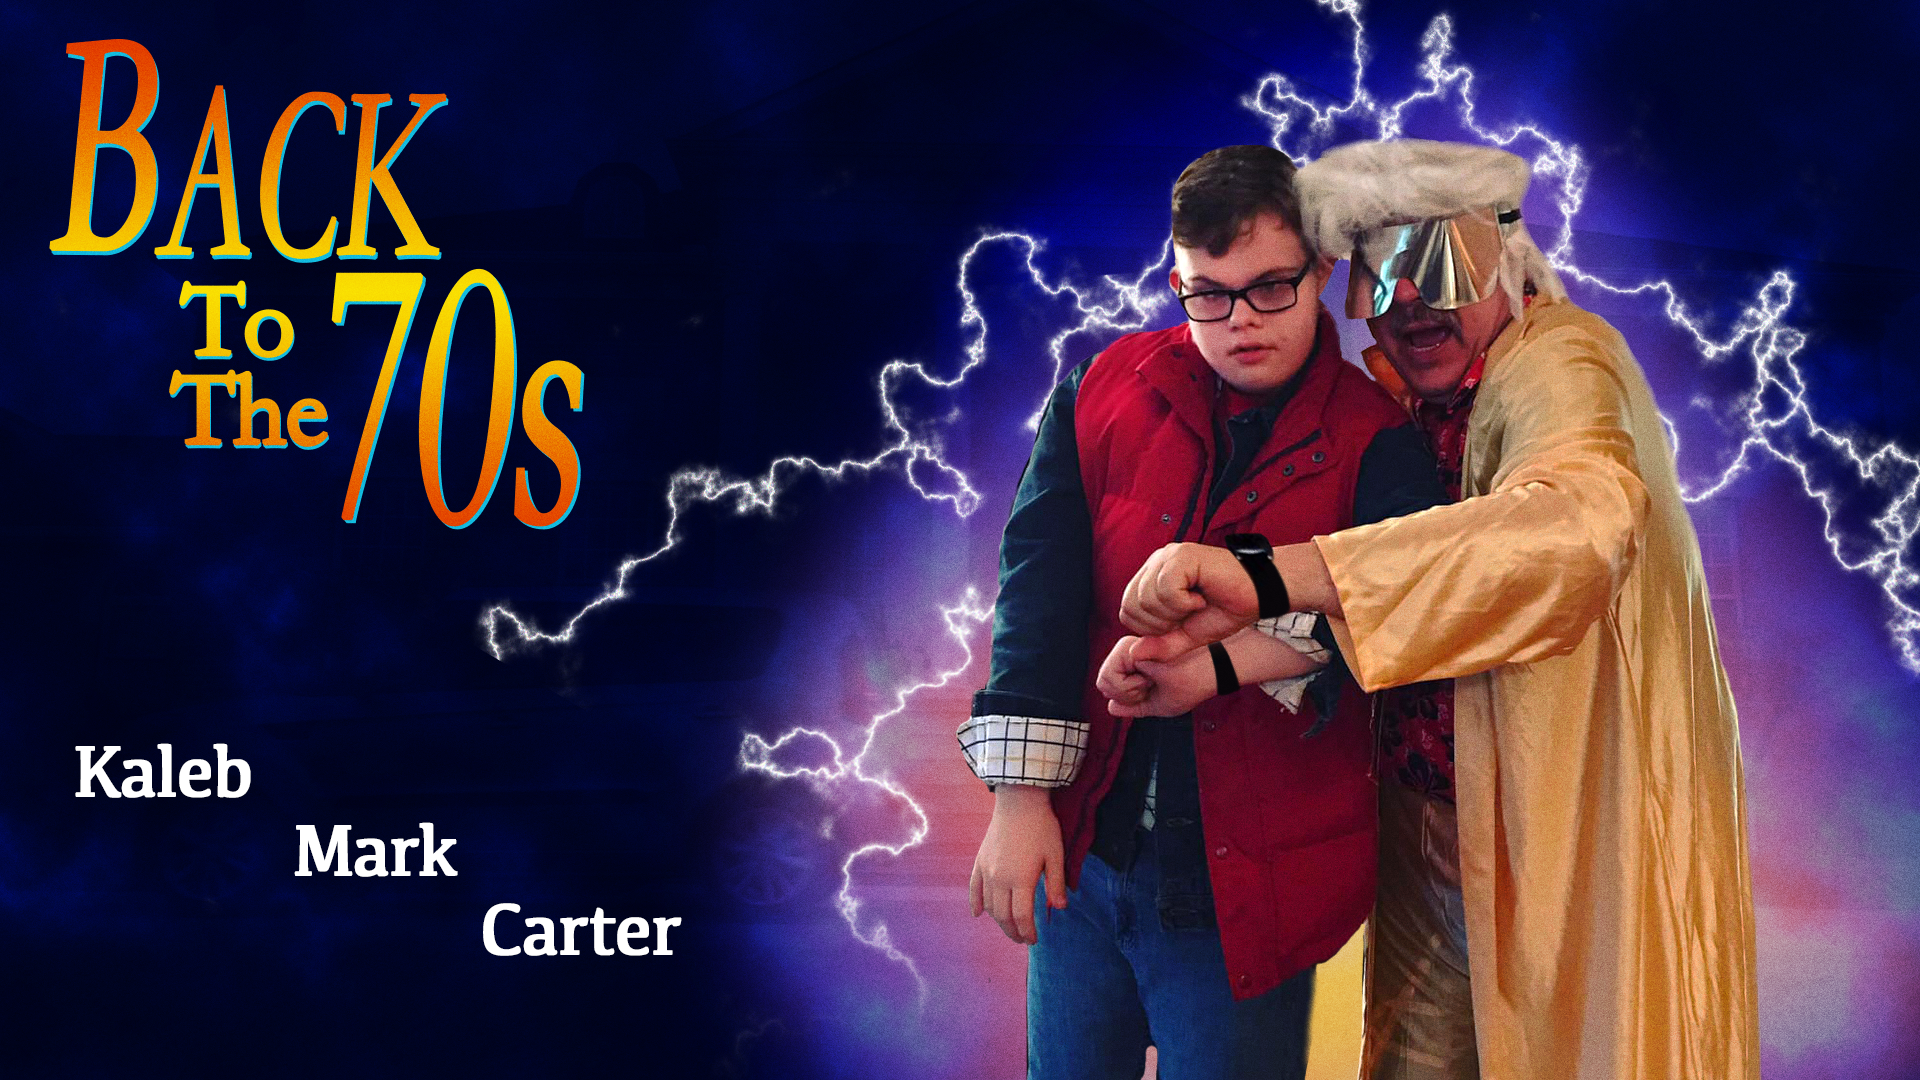 Doc and Marty are back for another adventure– this time to save the King of Rock and Roll!